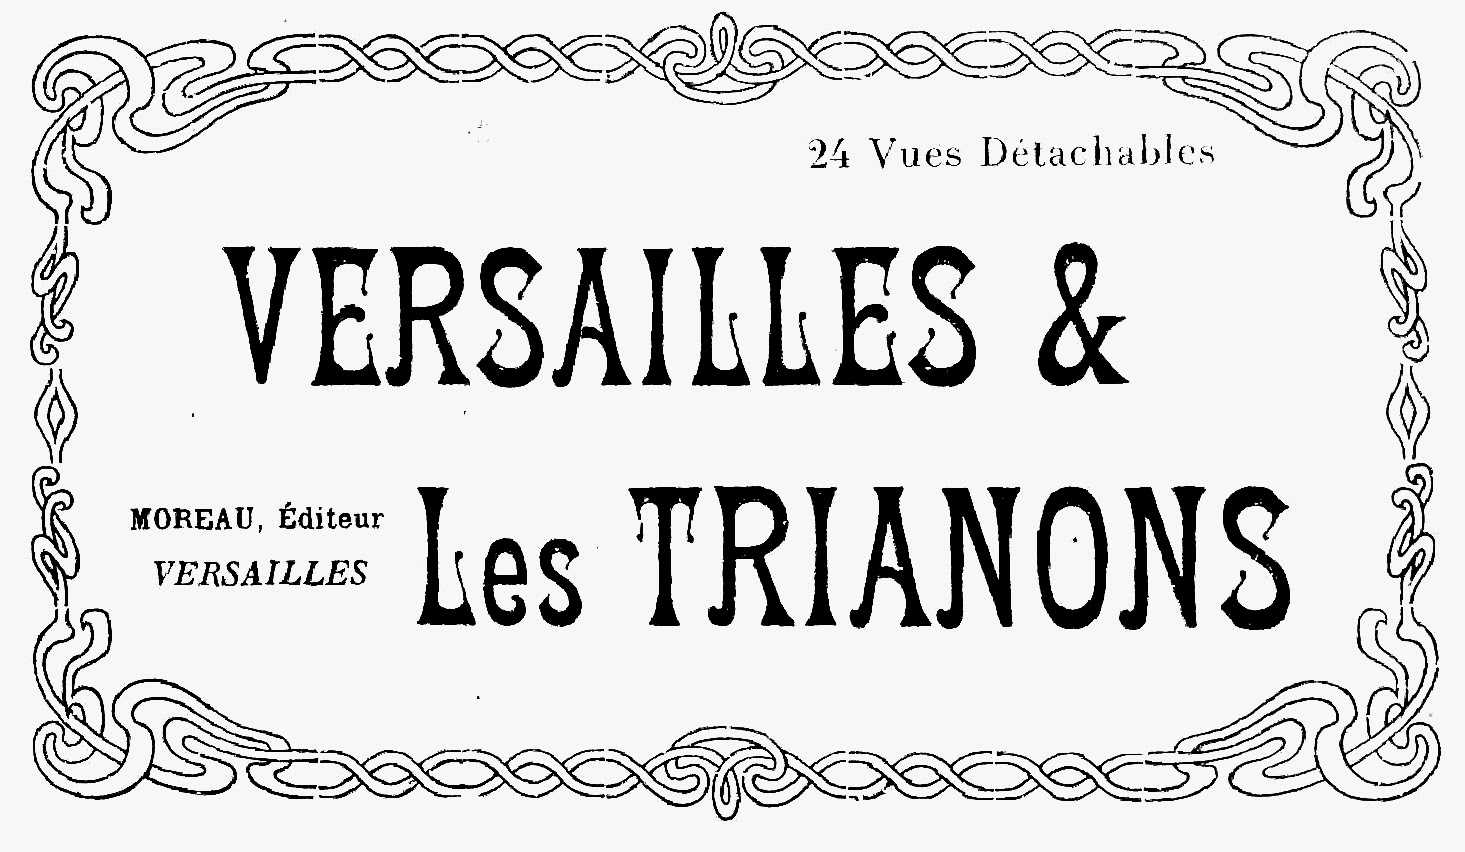 8 Beautiful Antique French Typography Printable   Postcard Book Cover ...